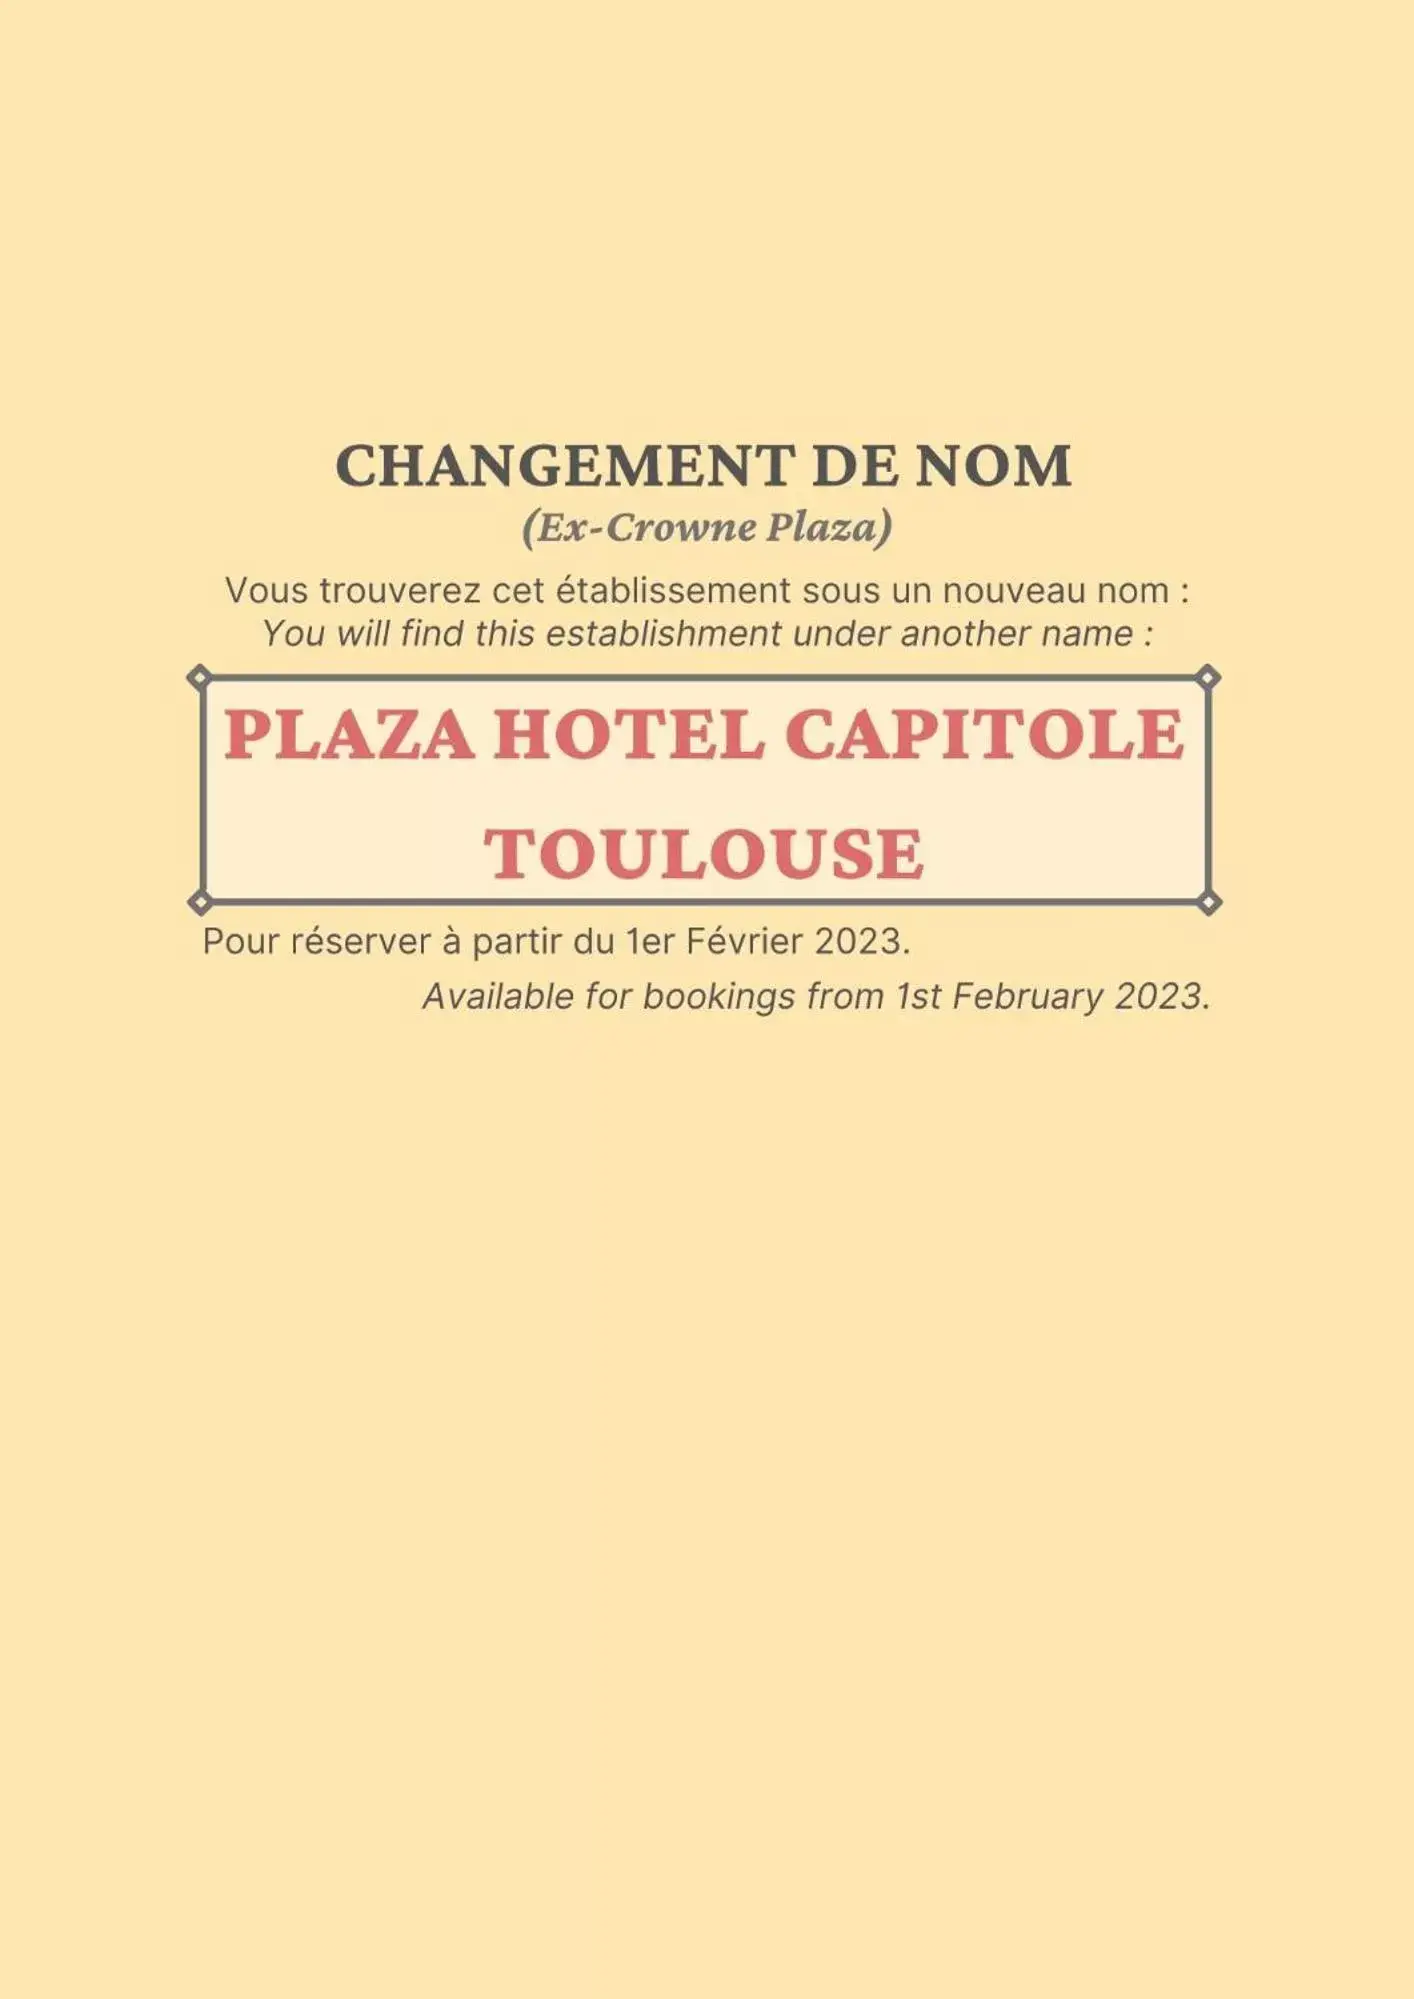 Text overlay in Plaza Hotel Capitole Toulouse - Anciennement-formerly CROWNE PLAZA